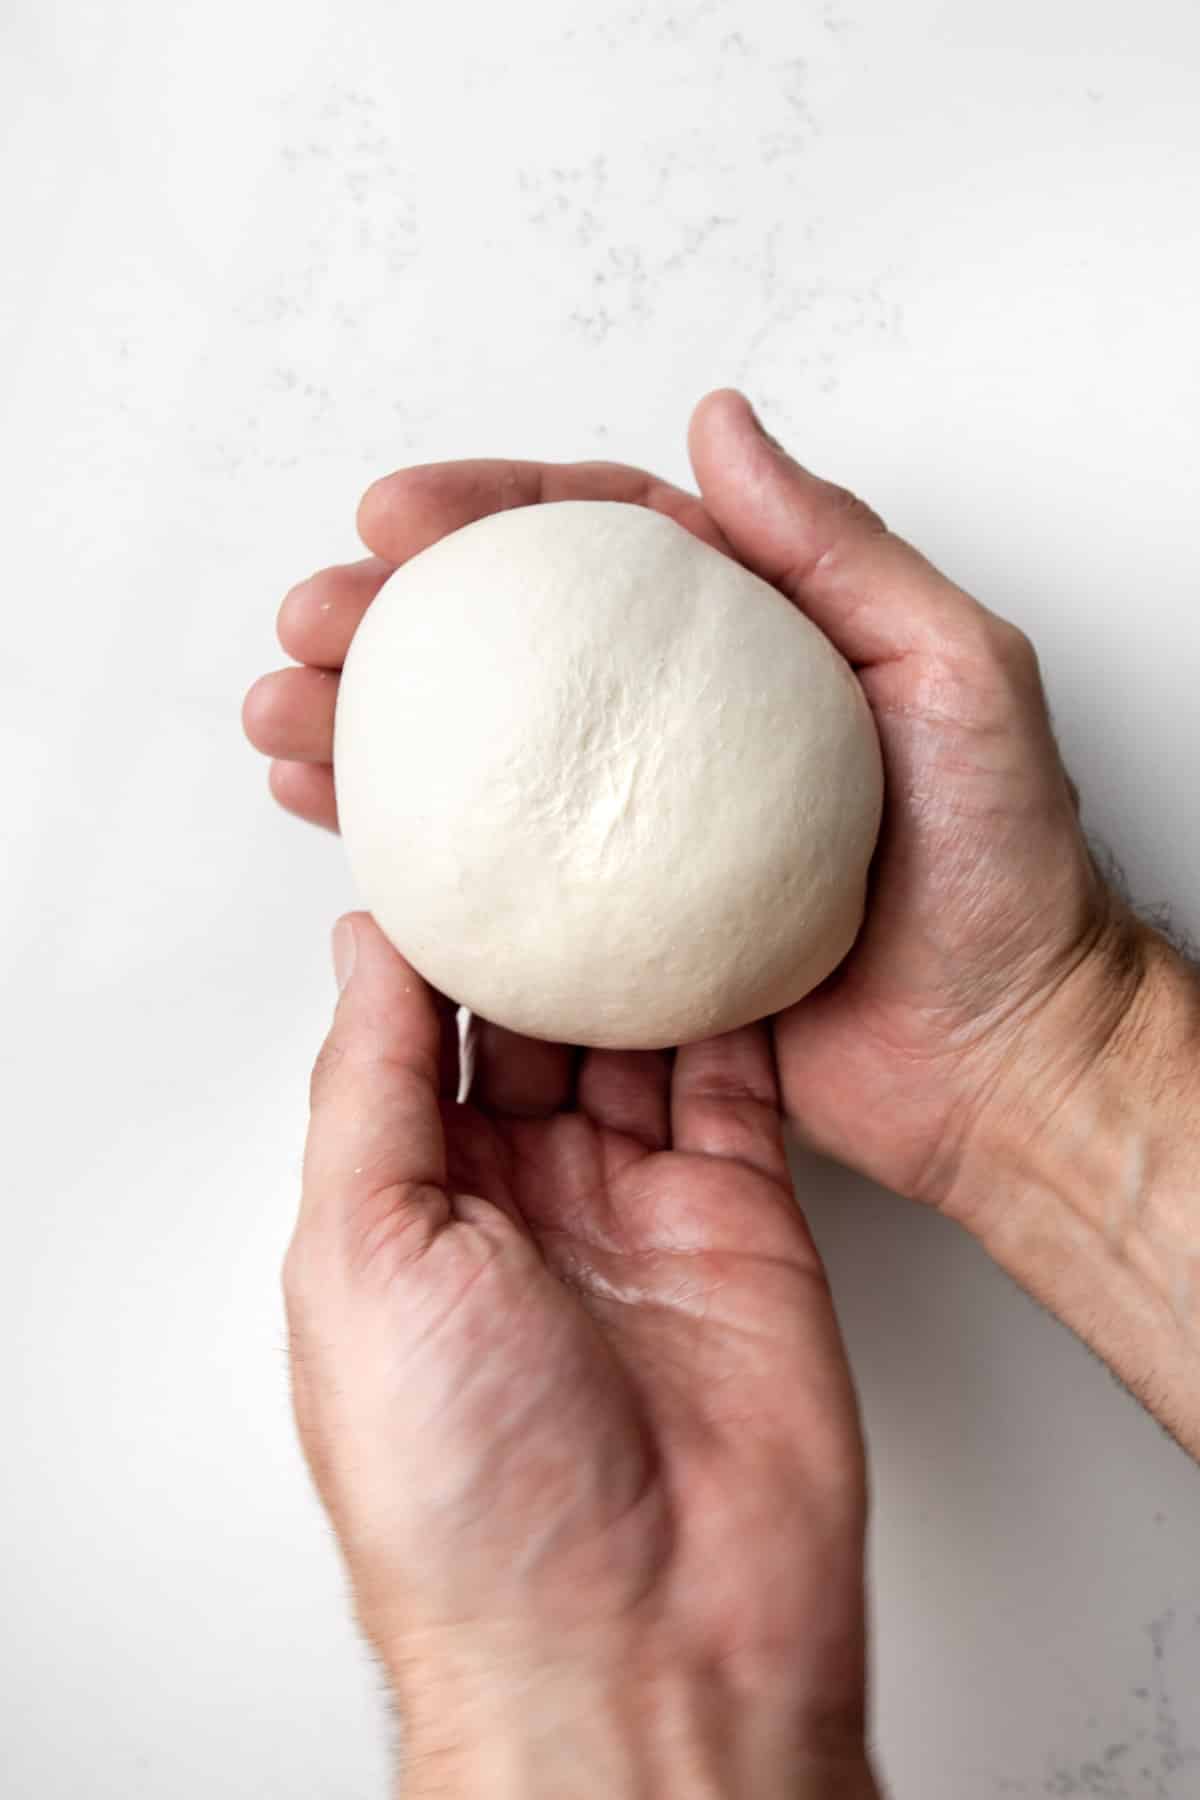 Rolled pizza dough in the palm of a man's hand.